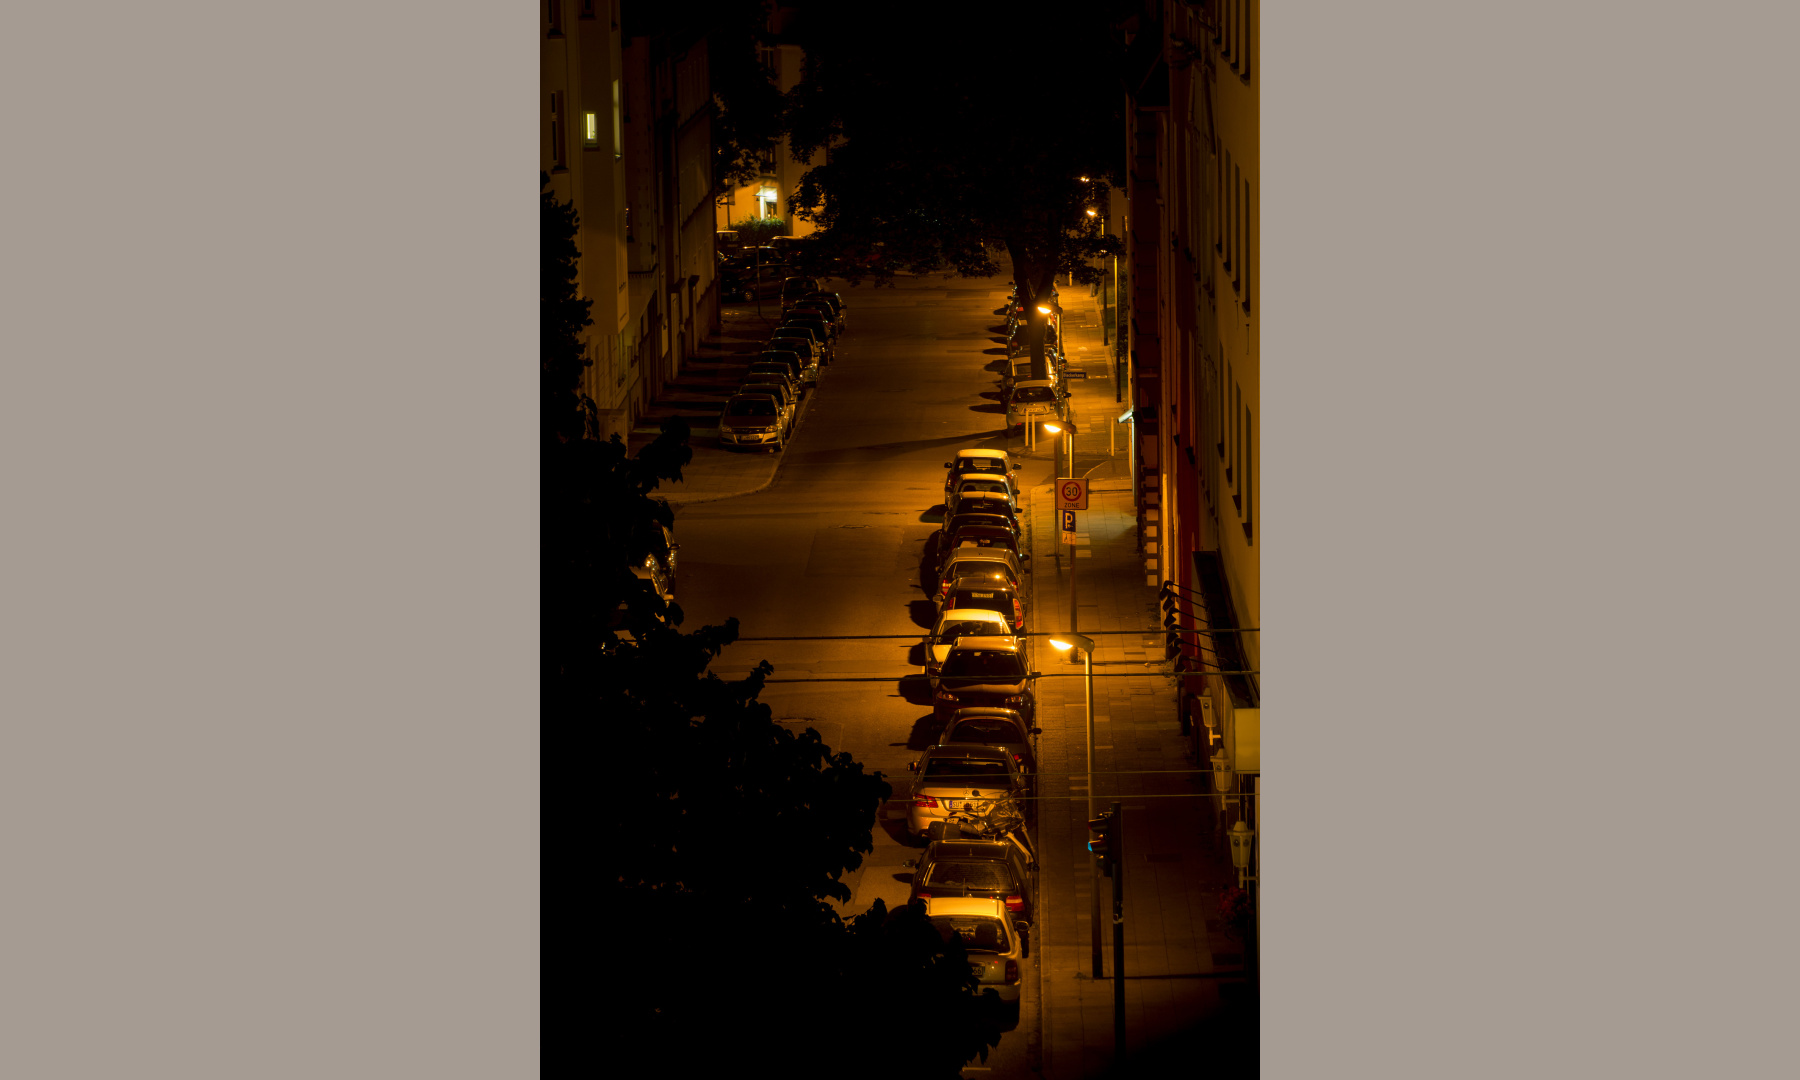 A view into the Herwarthstraße, Essen, from above during night